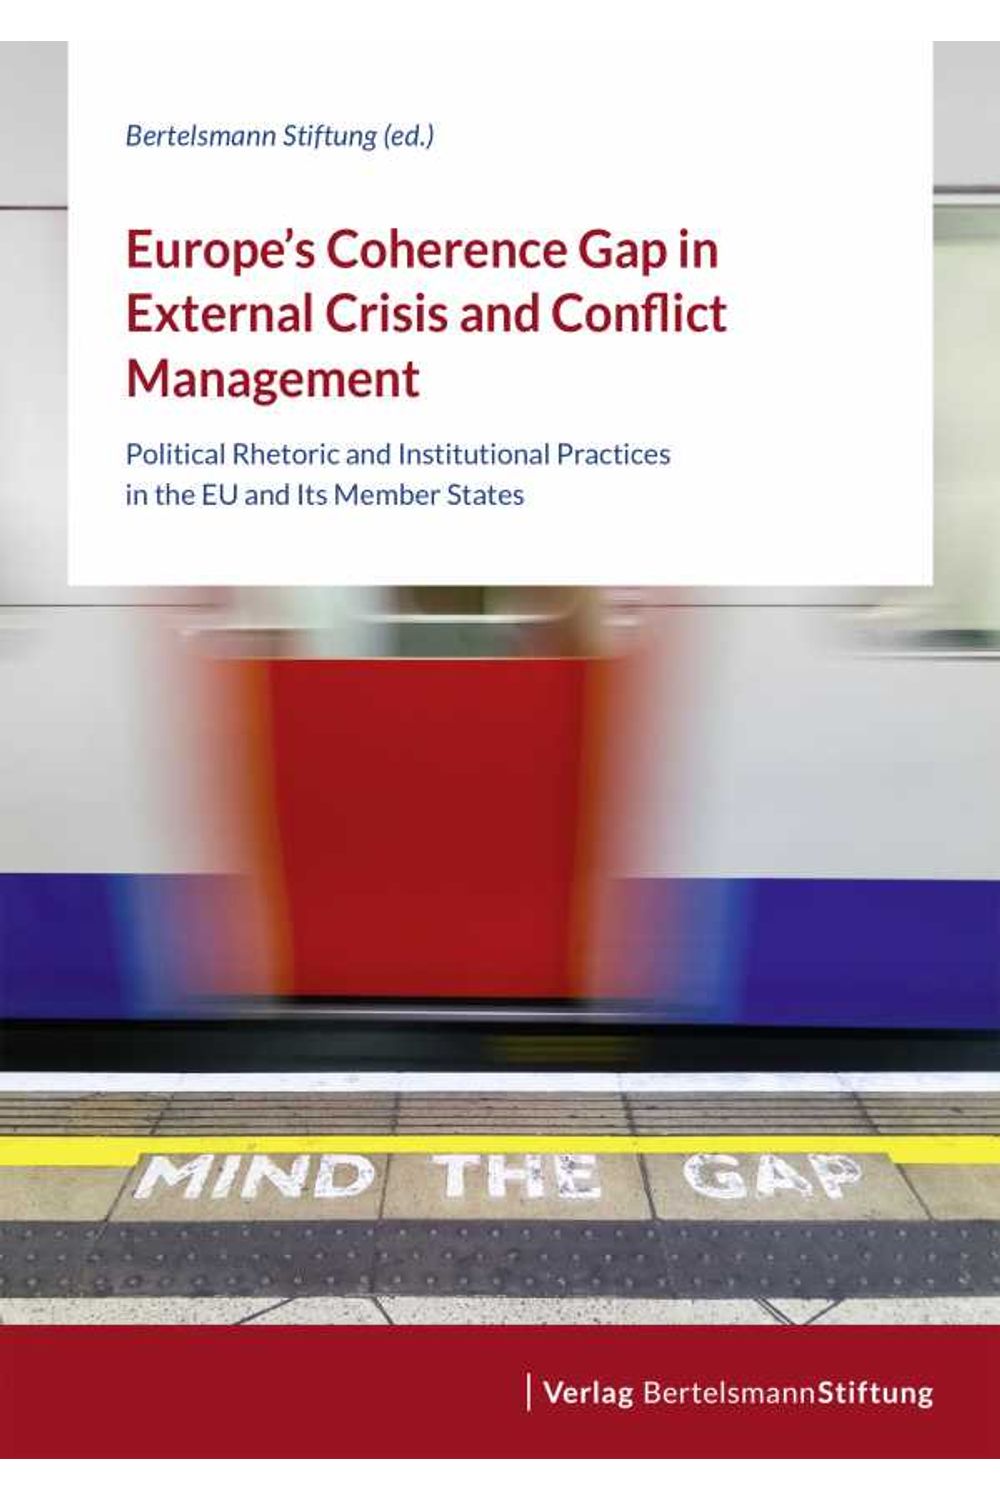 bw-europes-coherence-gap-in-external-crisis-and-conflict-management-verlag-bertelsmann-stiftung-9783867939133